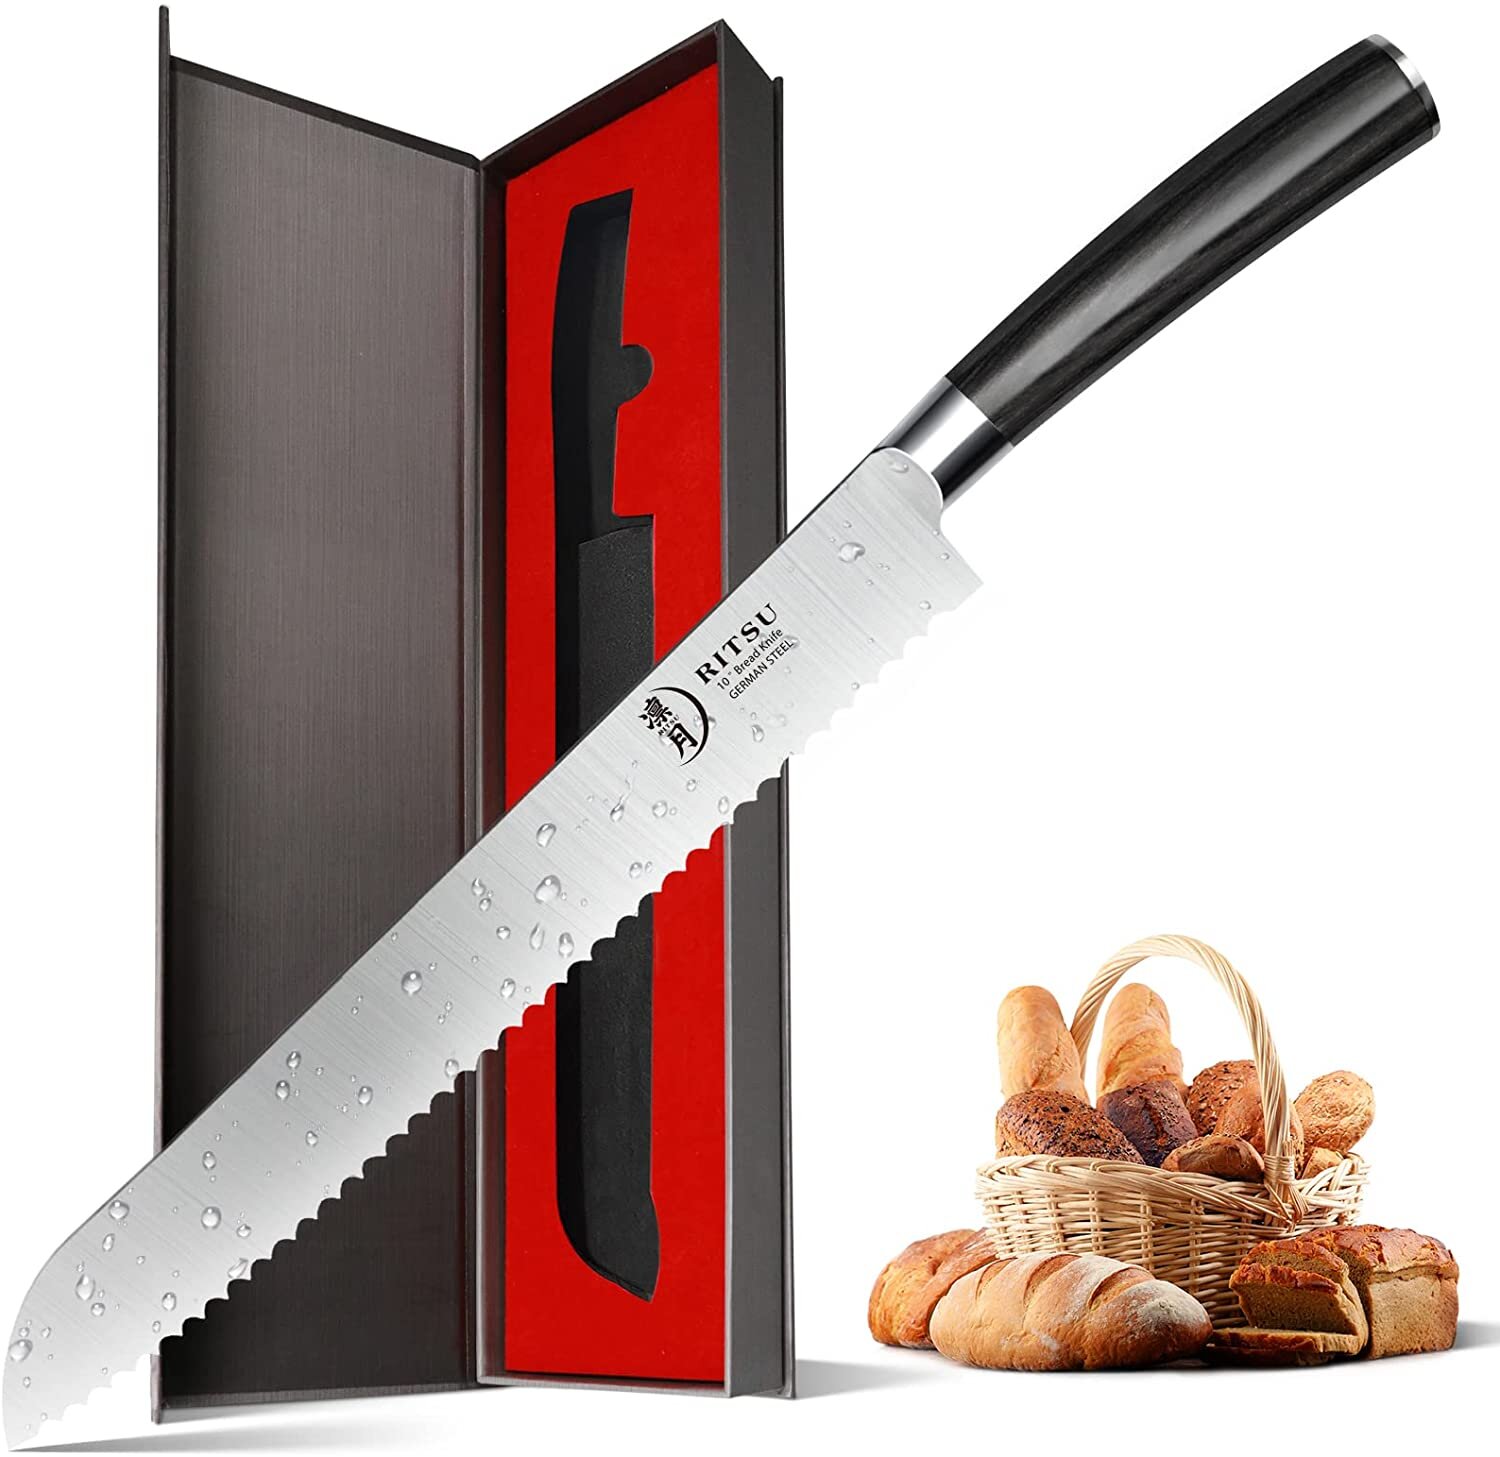 Buy KITCHEN SERRATED BREAD KNIFE 240 6 K110 WENGE PABIS